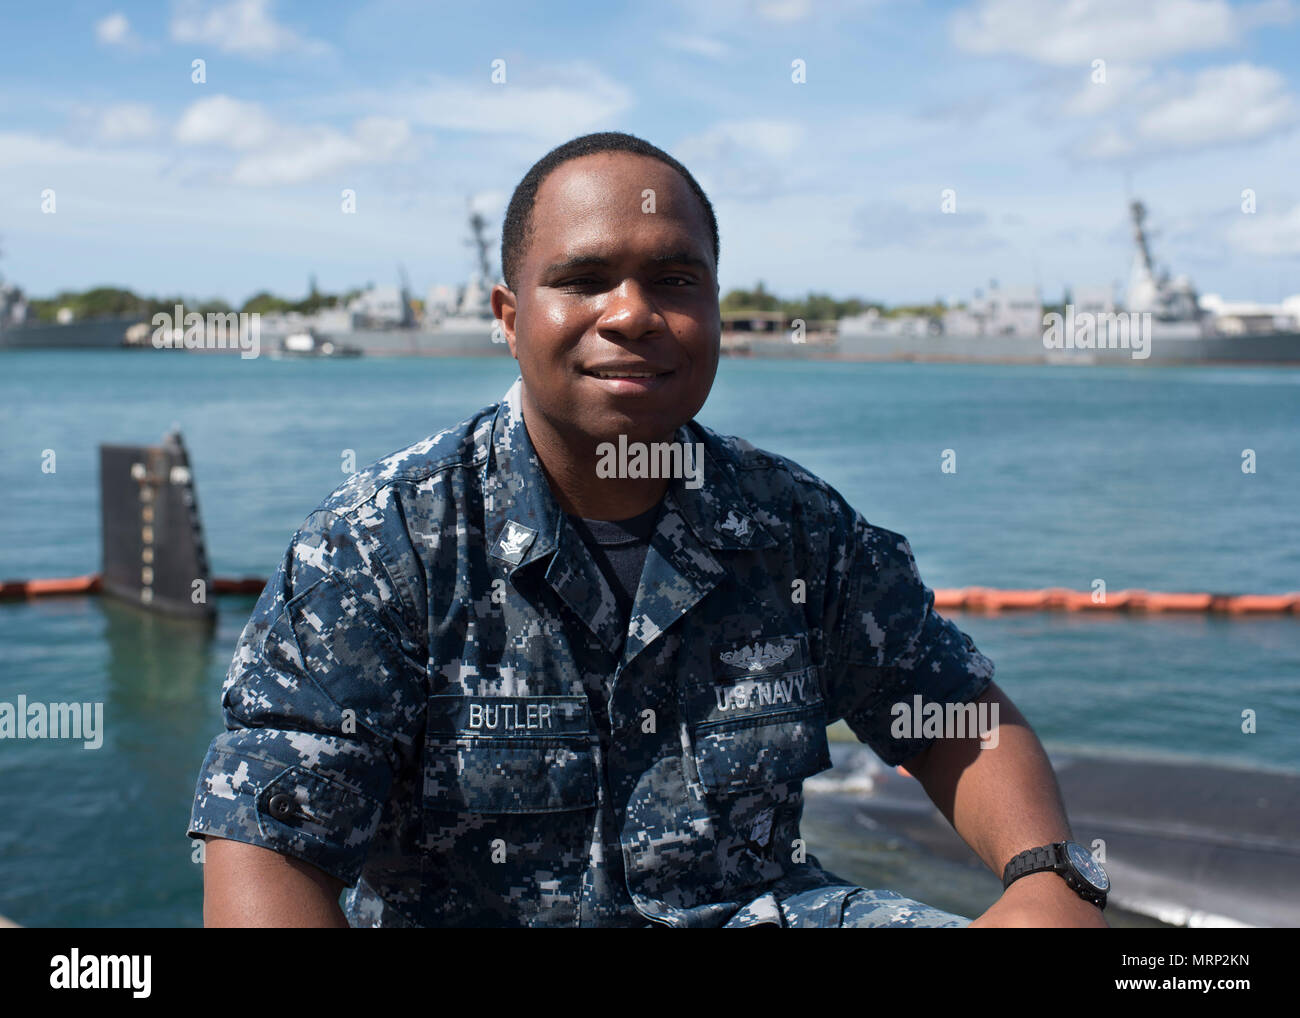 https://c8.alamy.com/comp/MRP2KN/i-joined-the-navy-to-travel-the-world-and-see-something-besides-my-hometown-i-became-a-culinary-specialist-because-i-like-to-cook-and-had-some-previous-experience-doing-it-i-particularly-enjoy-the-submarine-force-because-its-a-tight-knit-community-and-we-all-are-responsible-for-learning-aspects-of-each-others-job-if-one-guy-cant-do-it-the-next-one-can-step-up-and-get-it-done-im-proud-of-my-service-in-the-navy-i-look-at-it-as-leaving-my-mark-i-can-look-back-and-say-i-did-this-for-my-country-i-just-had-a-baby-boy-back-in-february-i-want-to-give-a-shout-out-to-him-and-say-happy-4th-MRP2KN.jpg